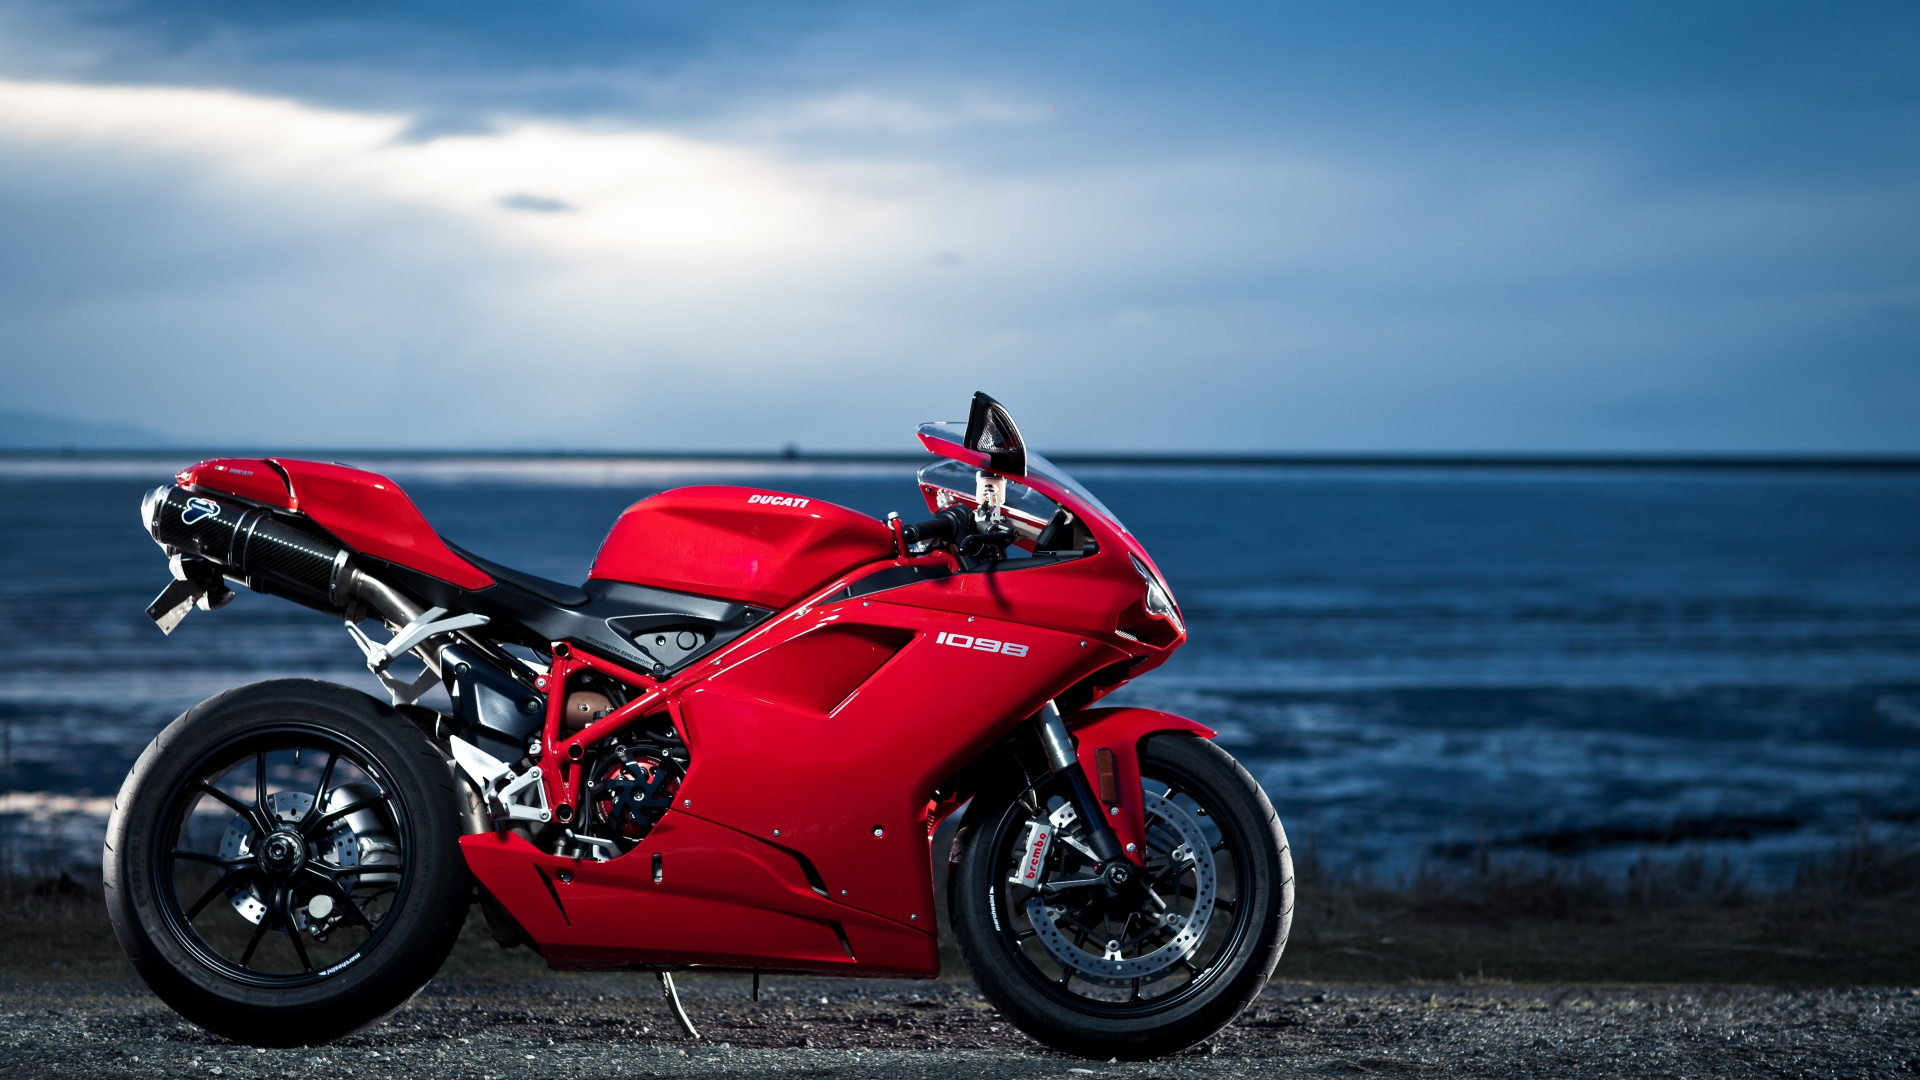 Red and Black Sports Bike on Seashore During Daytime. Wallpaper in 1920x1080 Resolution